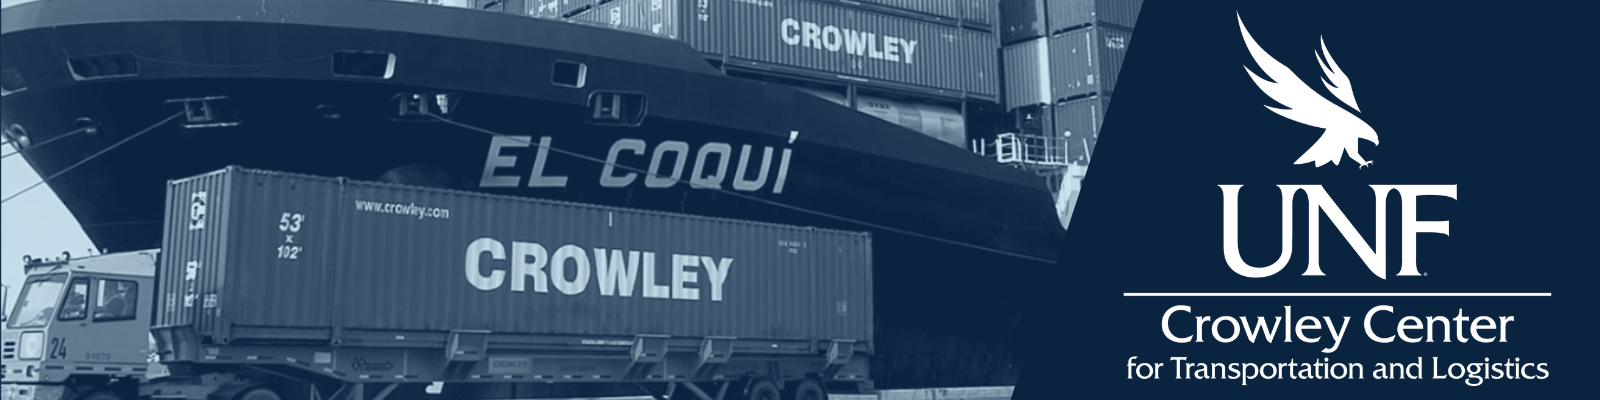 Crowley Ships at port, UNF Crowley Center for Transportation and Logistics logo